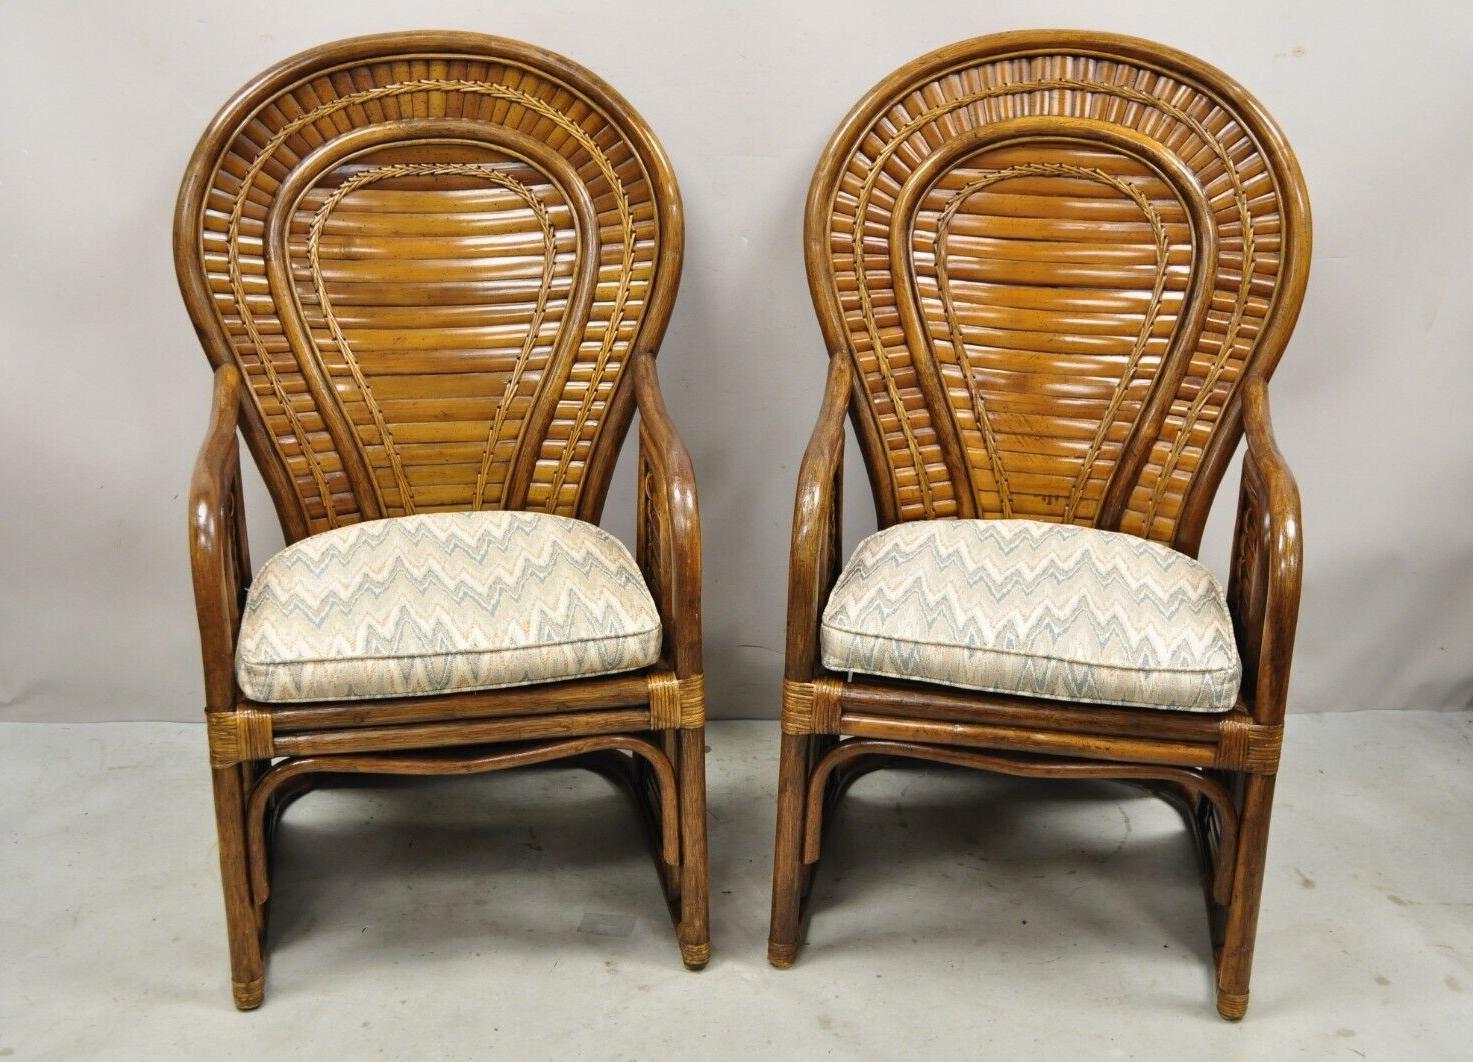 Pair Vintage Hollywood Regency Boho Chic Bentwood Rattan Fan Back Lounge Chairs. Item features shapely fan backs, bentwood frames, loose cushions, sleek sculptural form. Circa  Late 20th century. Measurements: 44